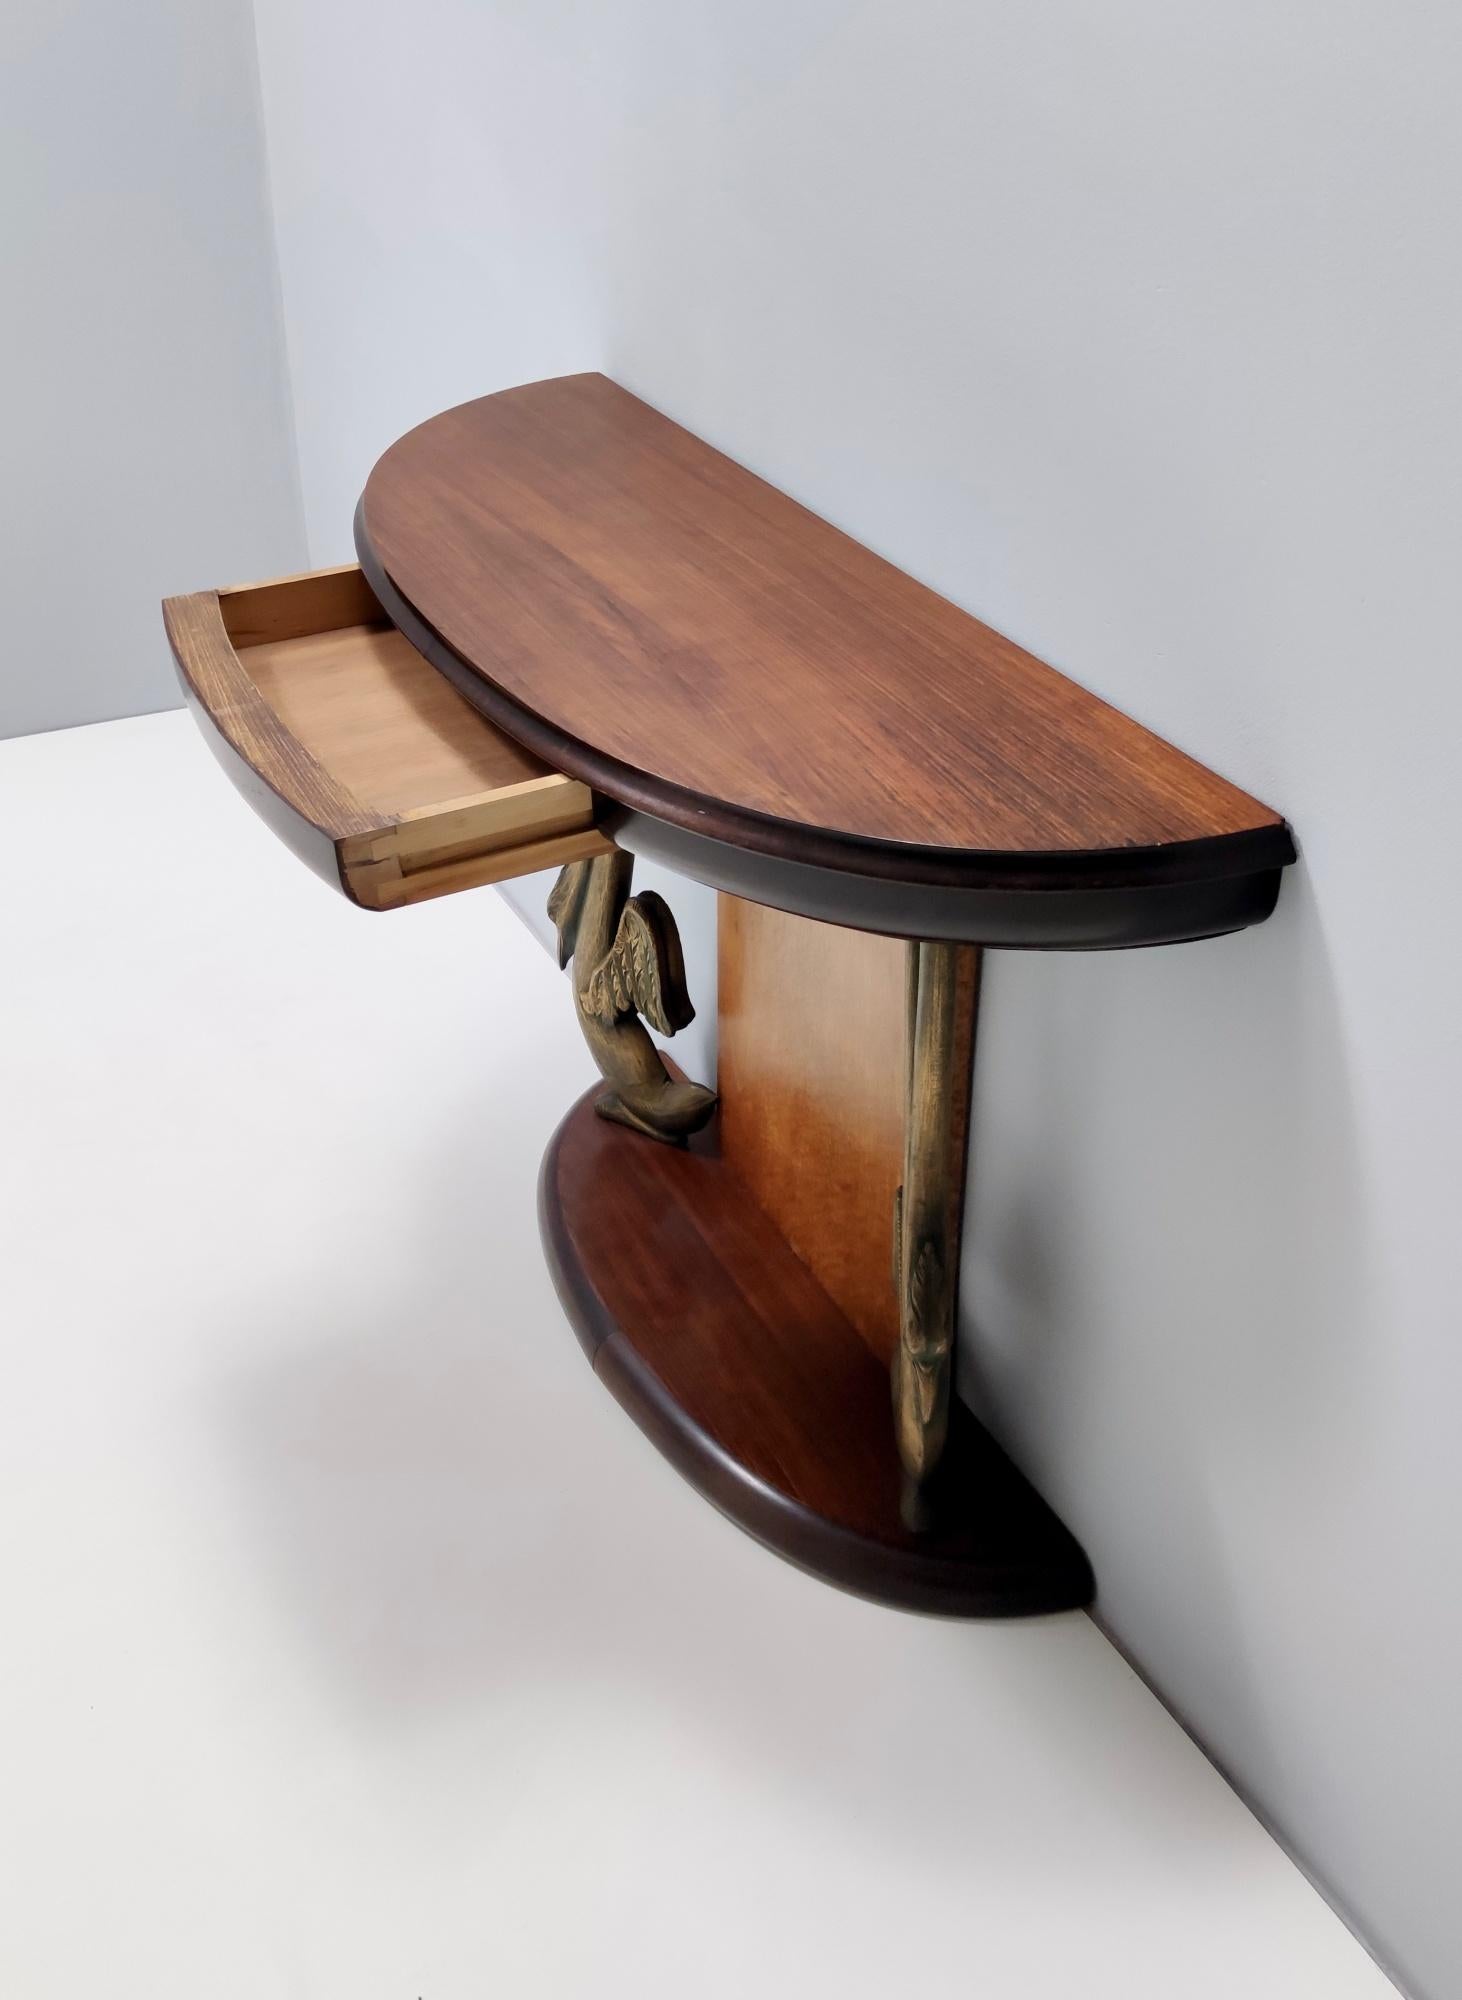 Beech Vintage Sculptural Swan Motif Canaletto Walnut Console Table by Dassi, Italy